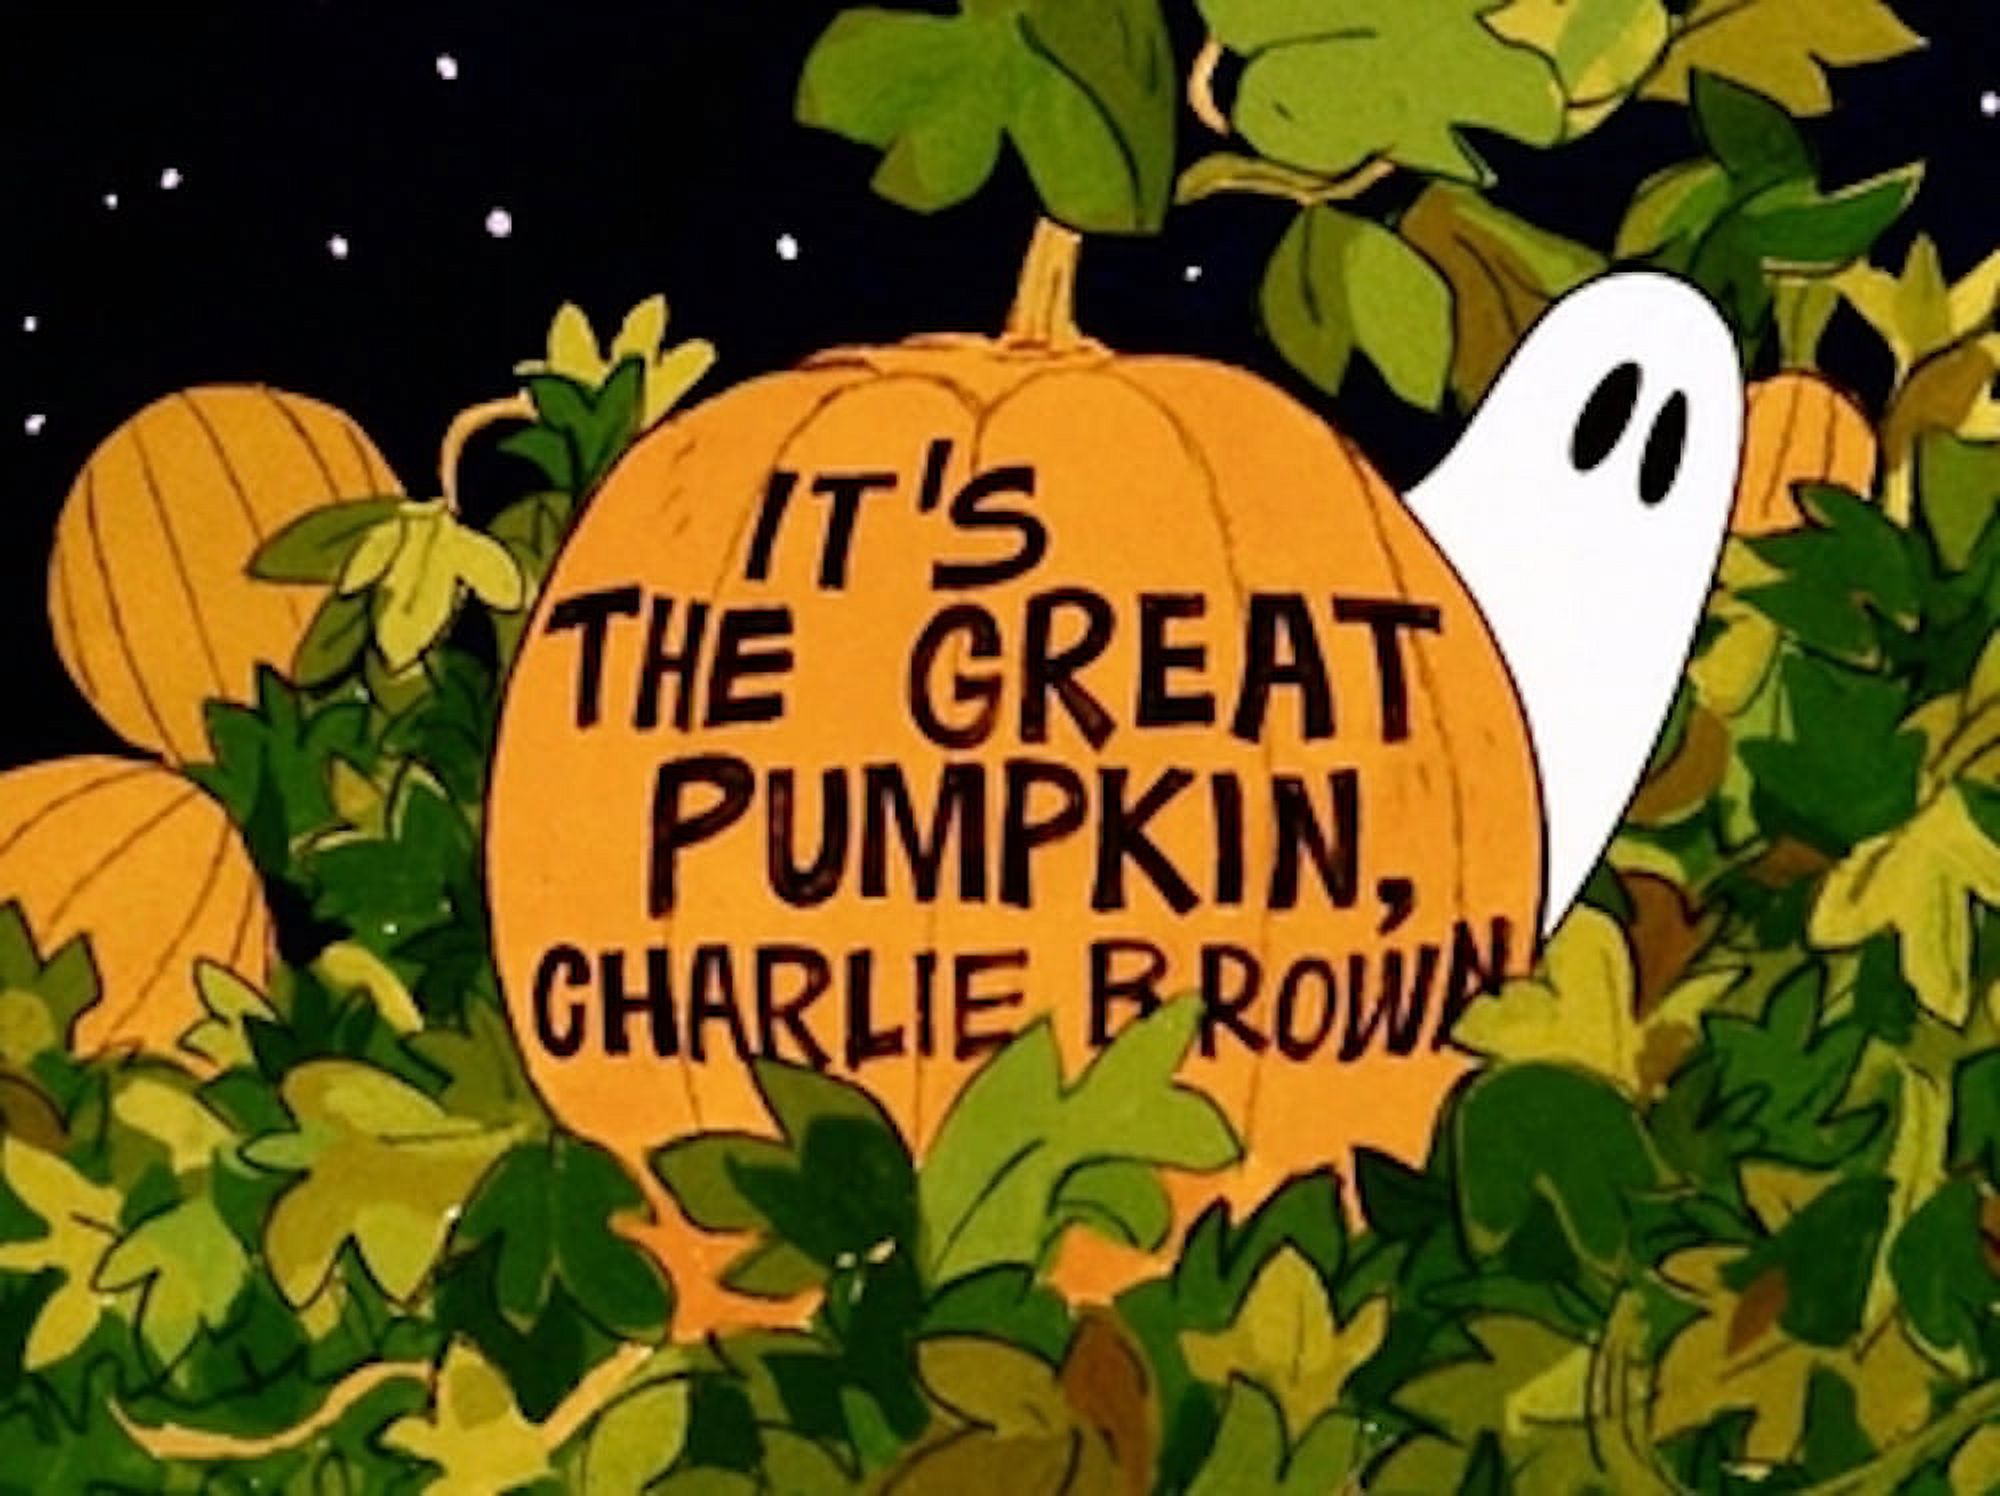 It's the Great Pumpkin, Charlie Brown (DVD), Warner Home Video, Animation - image 3 of 9